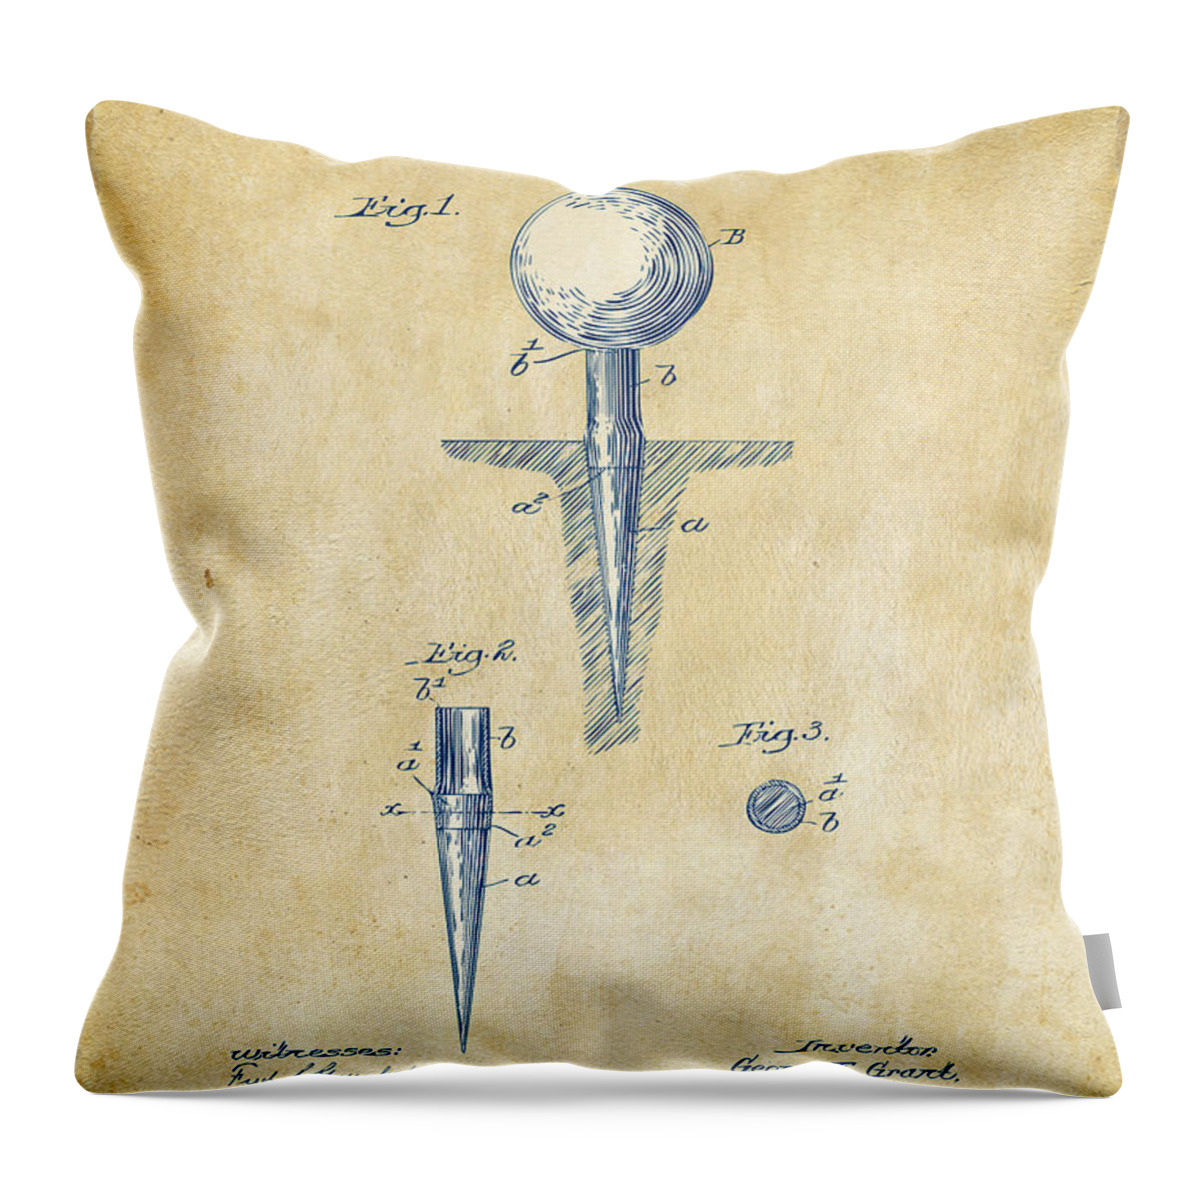 Golf Throw Pillow featuring the digital art Vintage 1899 Golf Tee Patent Artwork by Nikki Marie Smith